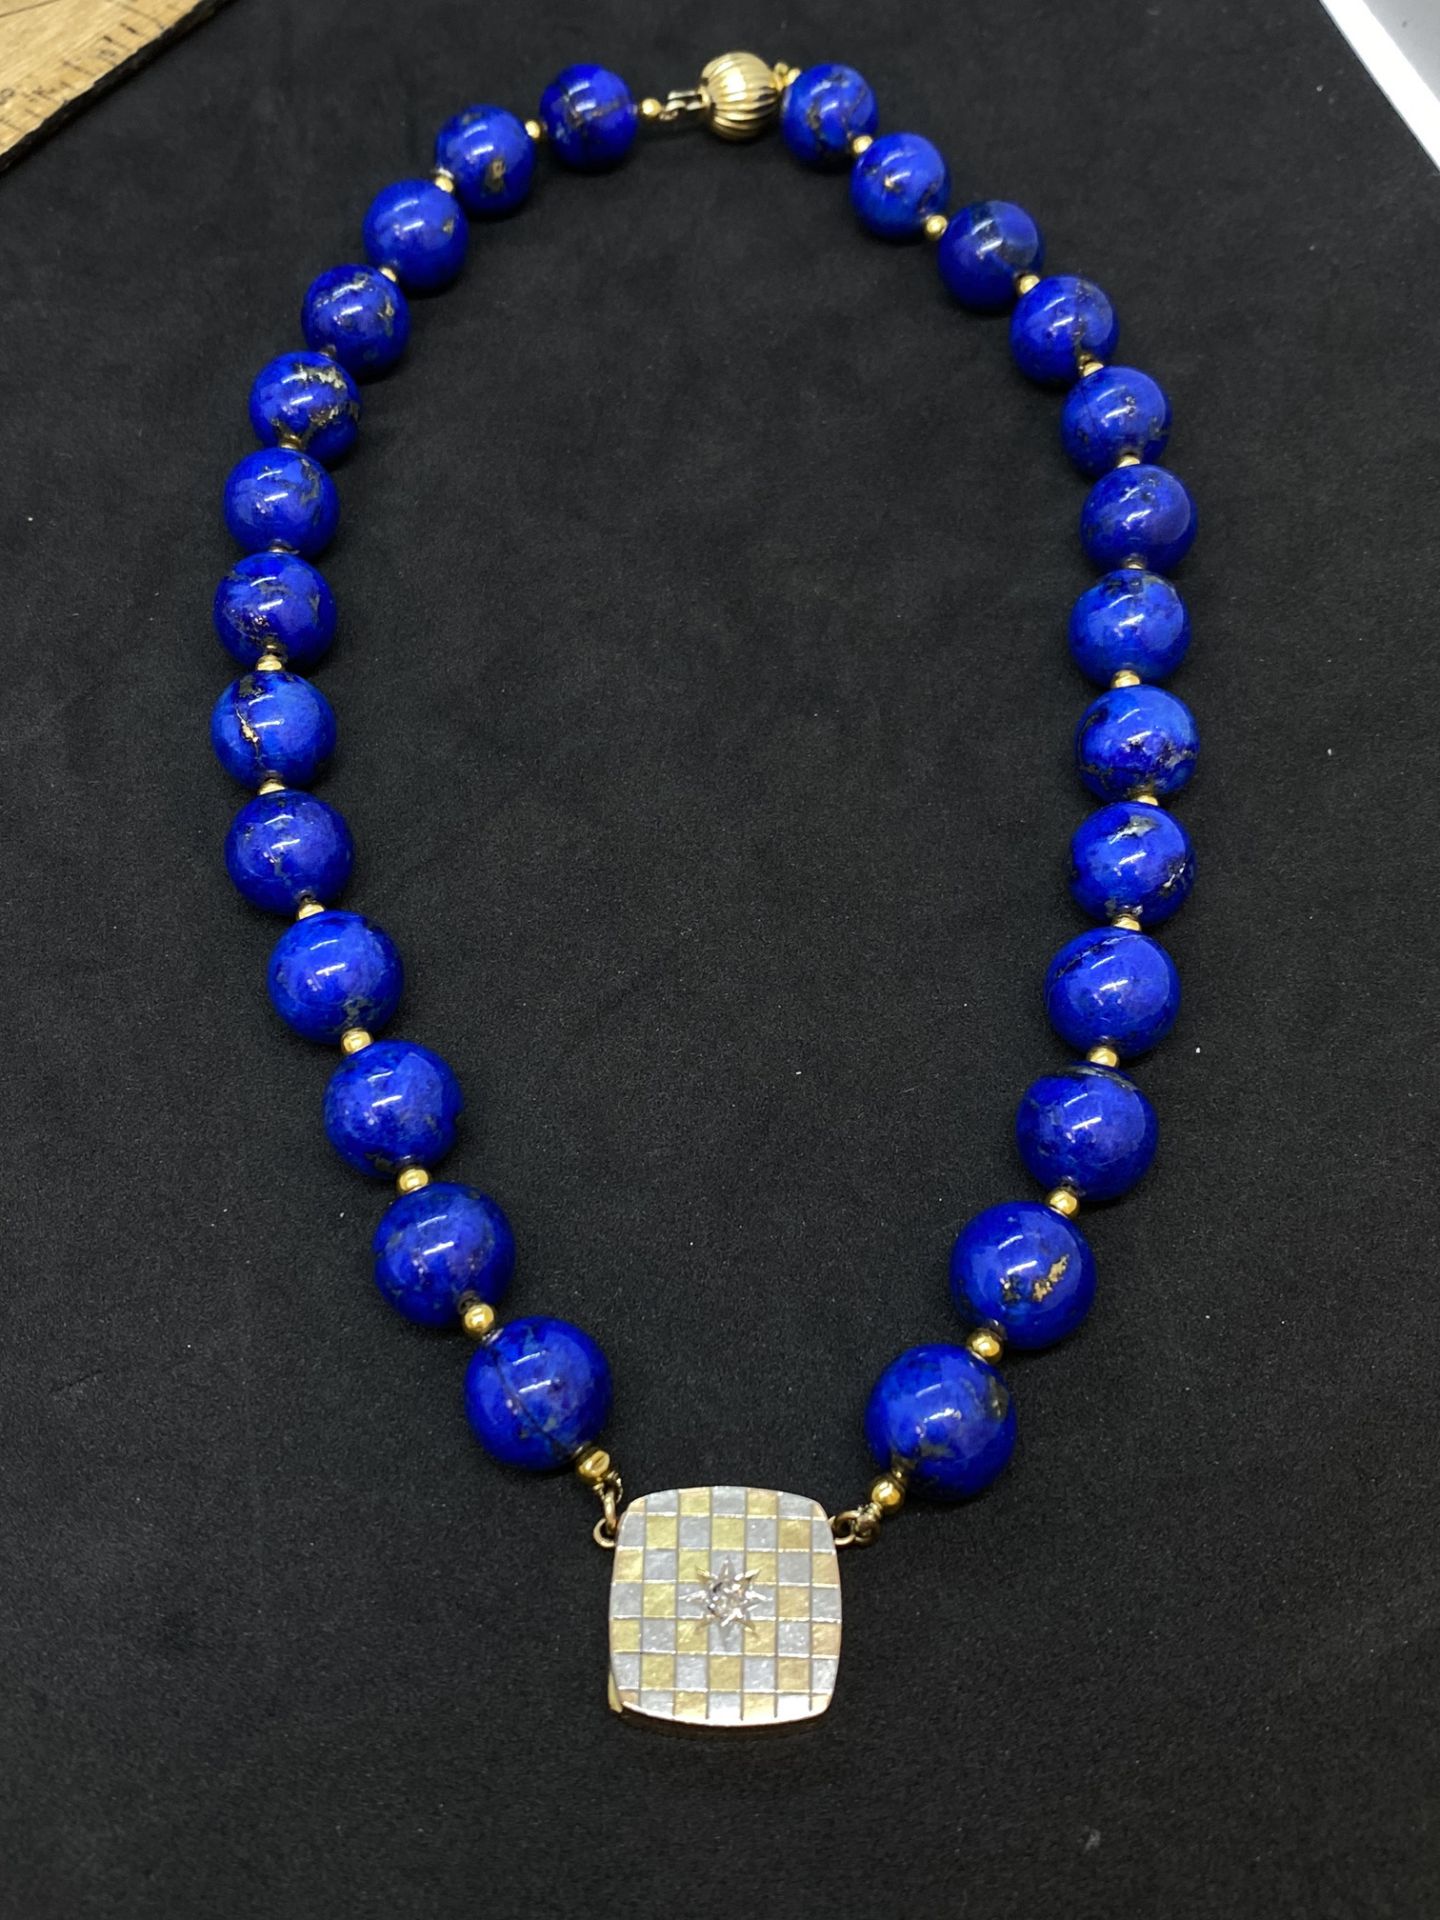 18ct GOLD LAPIS NECKLACE 76 GRAMS - Image 4 of 6